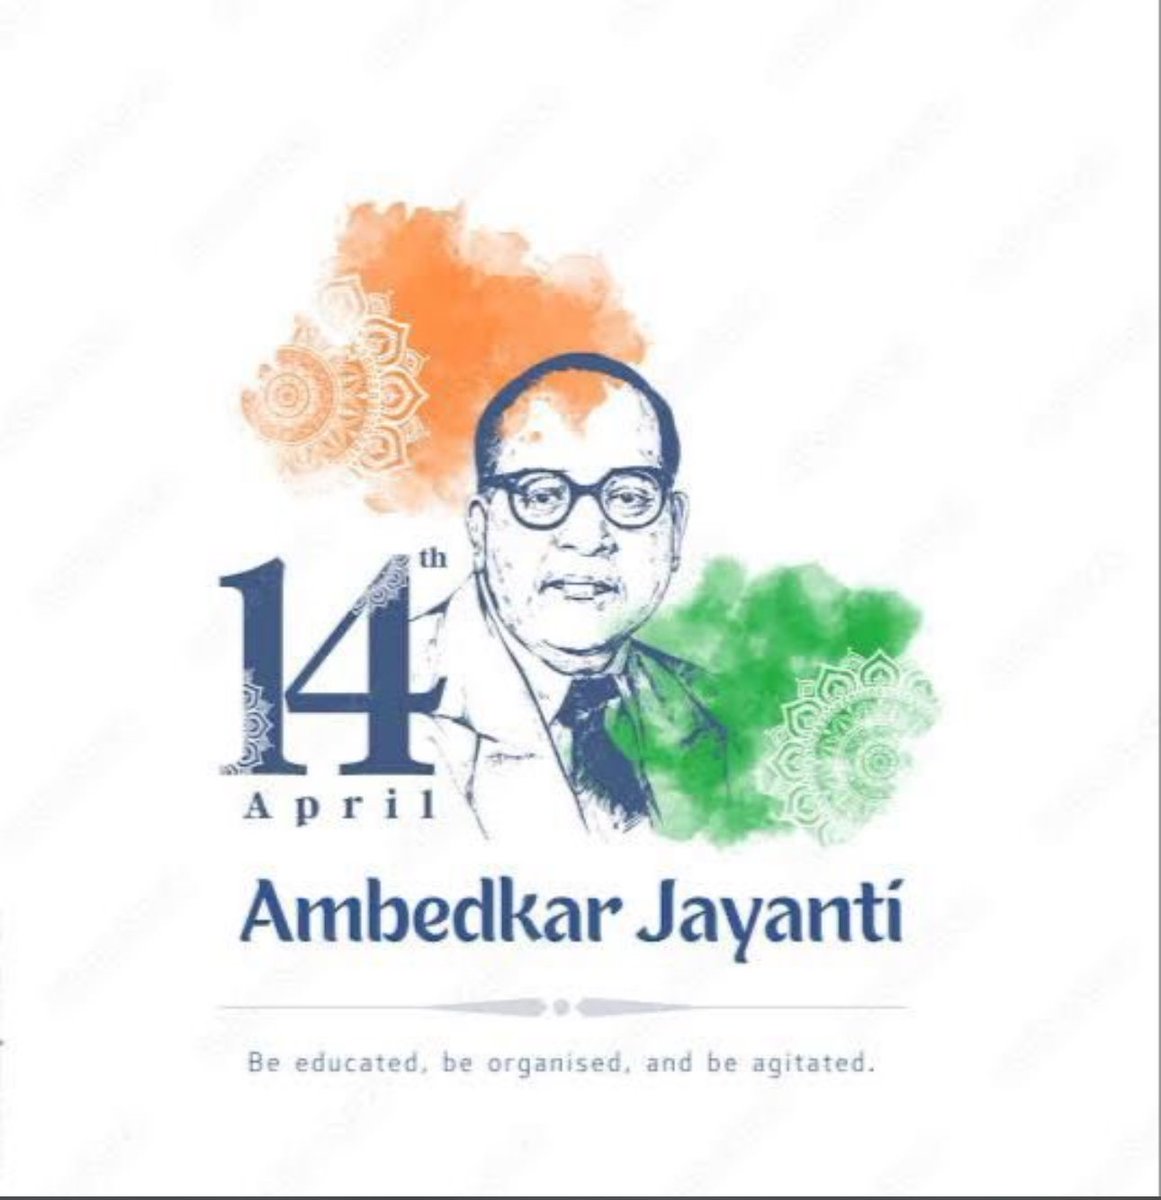 Tribute to the great architect of our constitution! #AmbedkarJayanti #Constitution